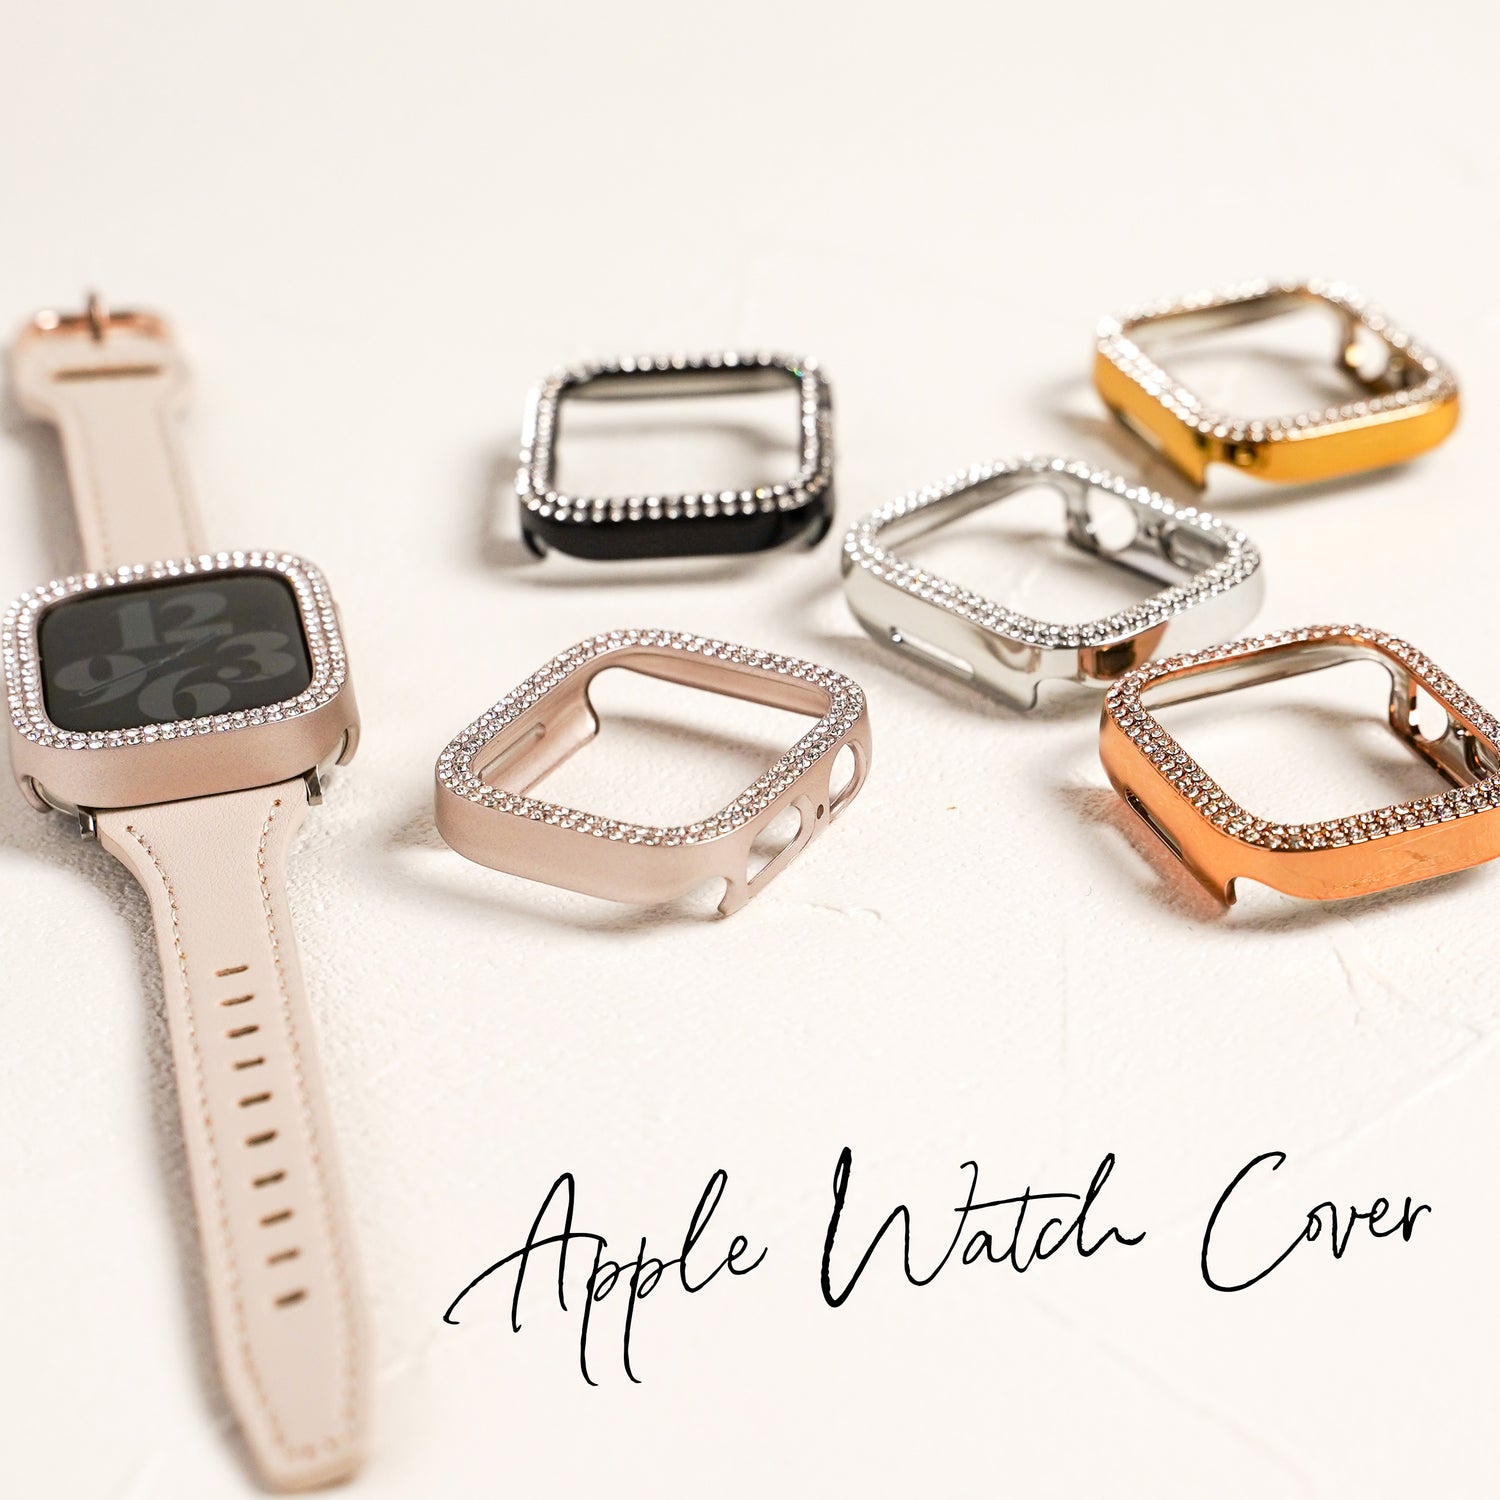 Apple Watch Cover Case Frame Apple Watch Cover Case